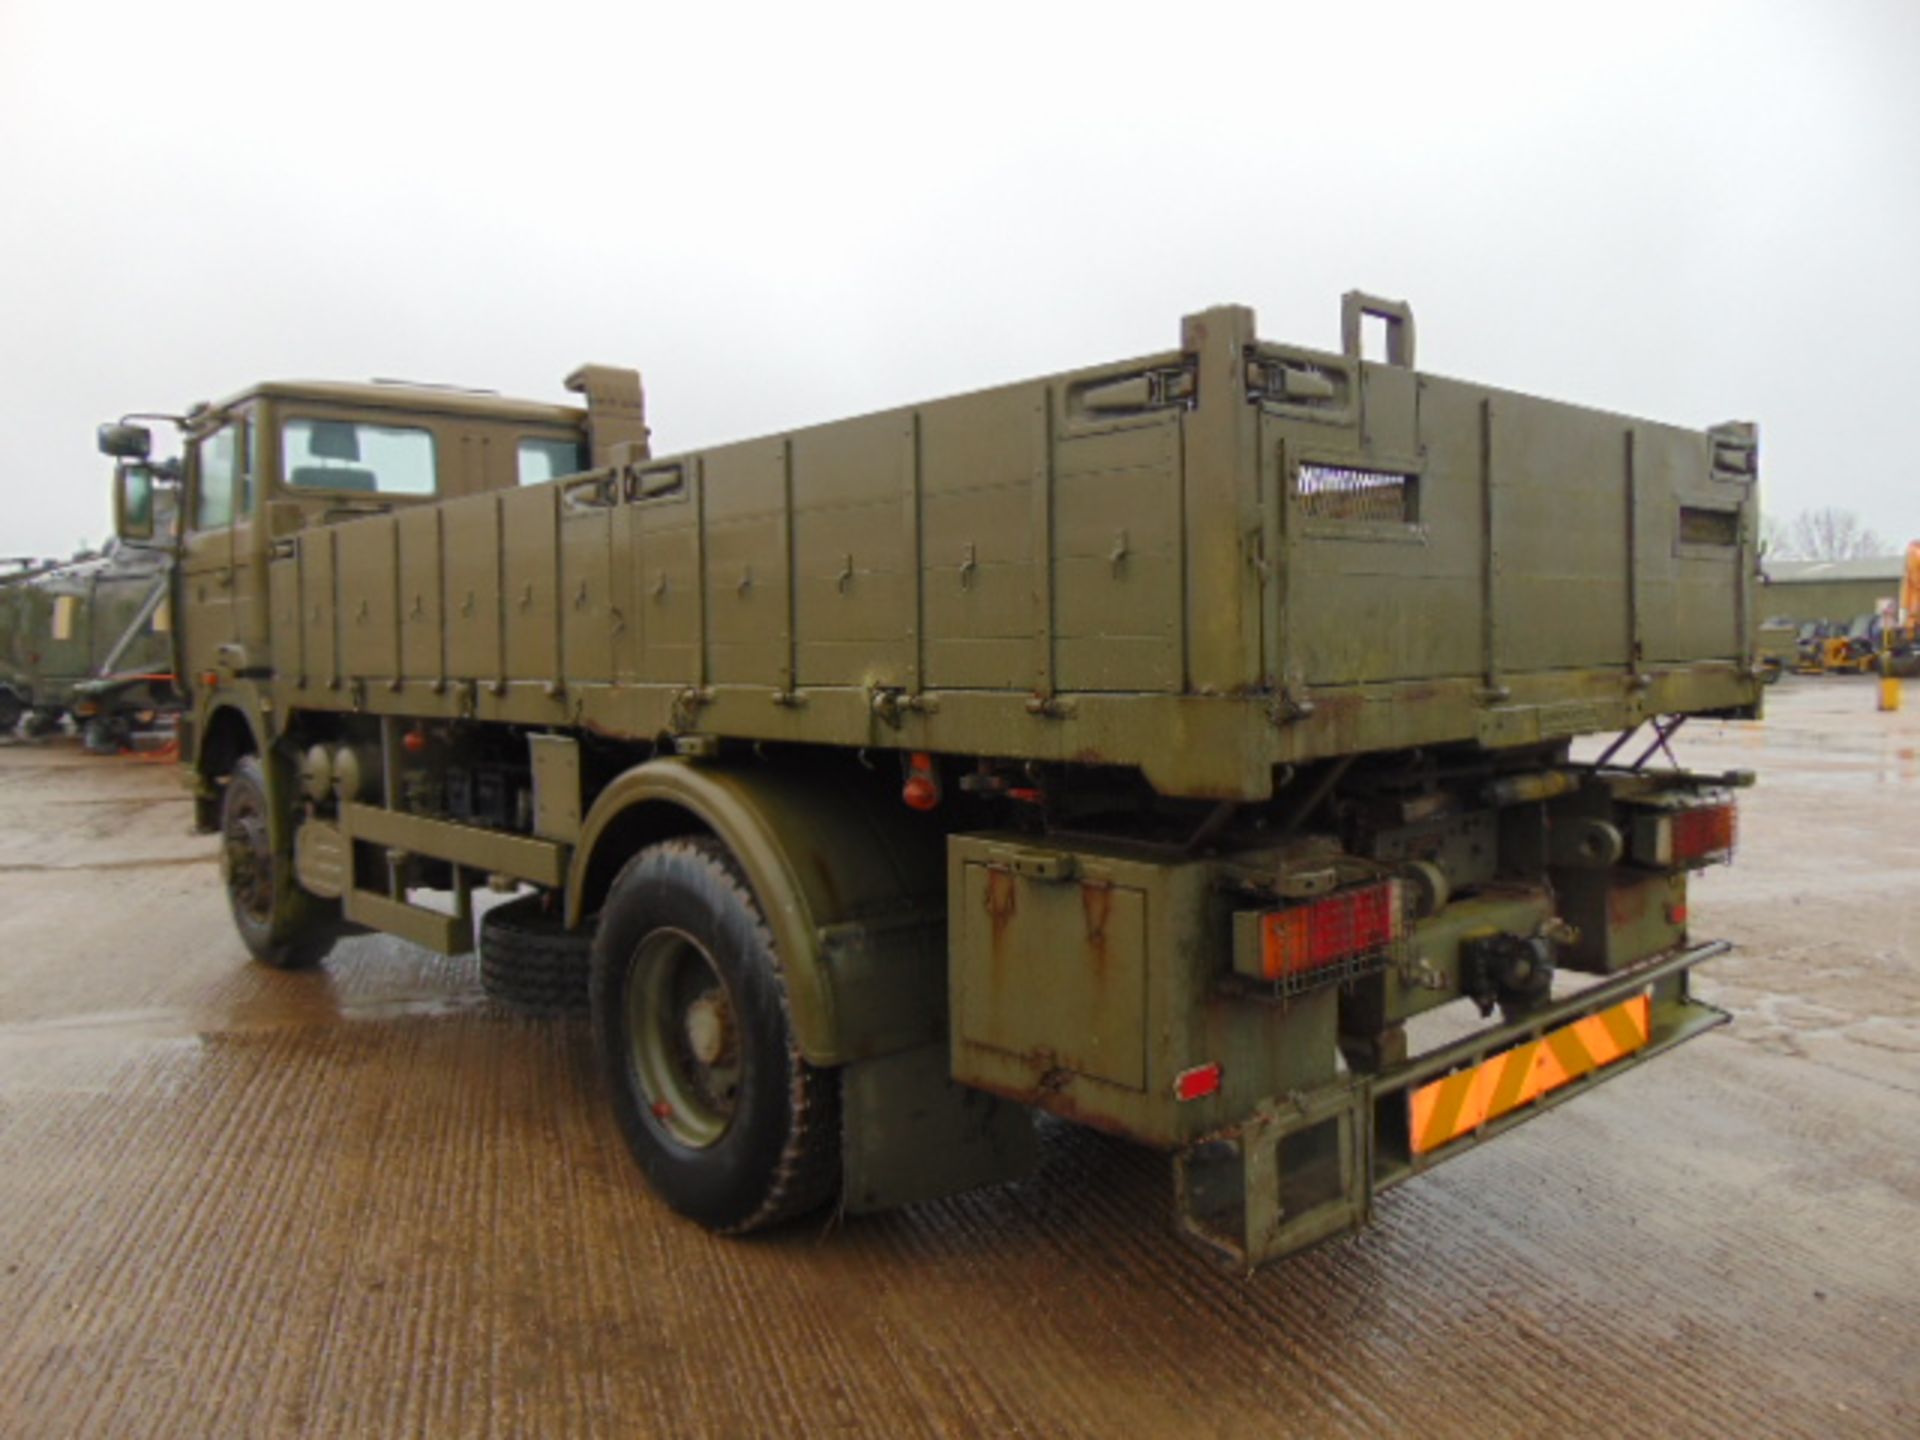 Renault G300 Maxter RHD 4x4 8T Cargo Truck with Fitted Winch - Image 5 of 17